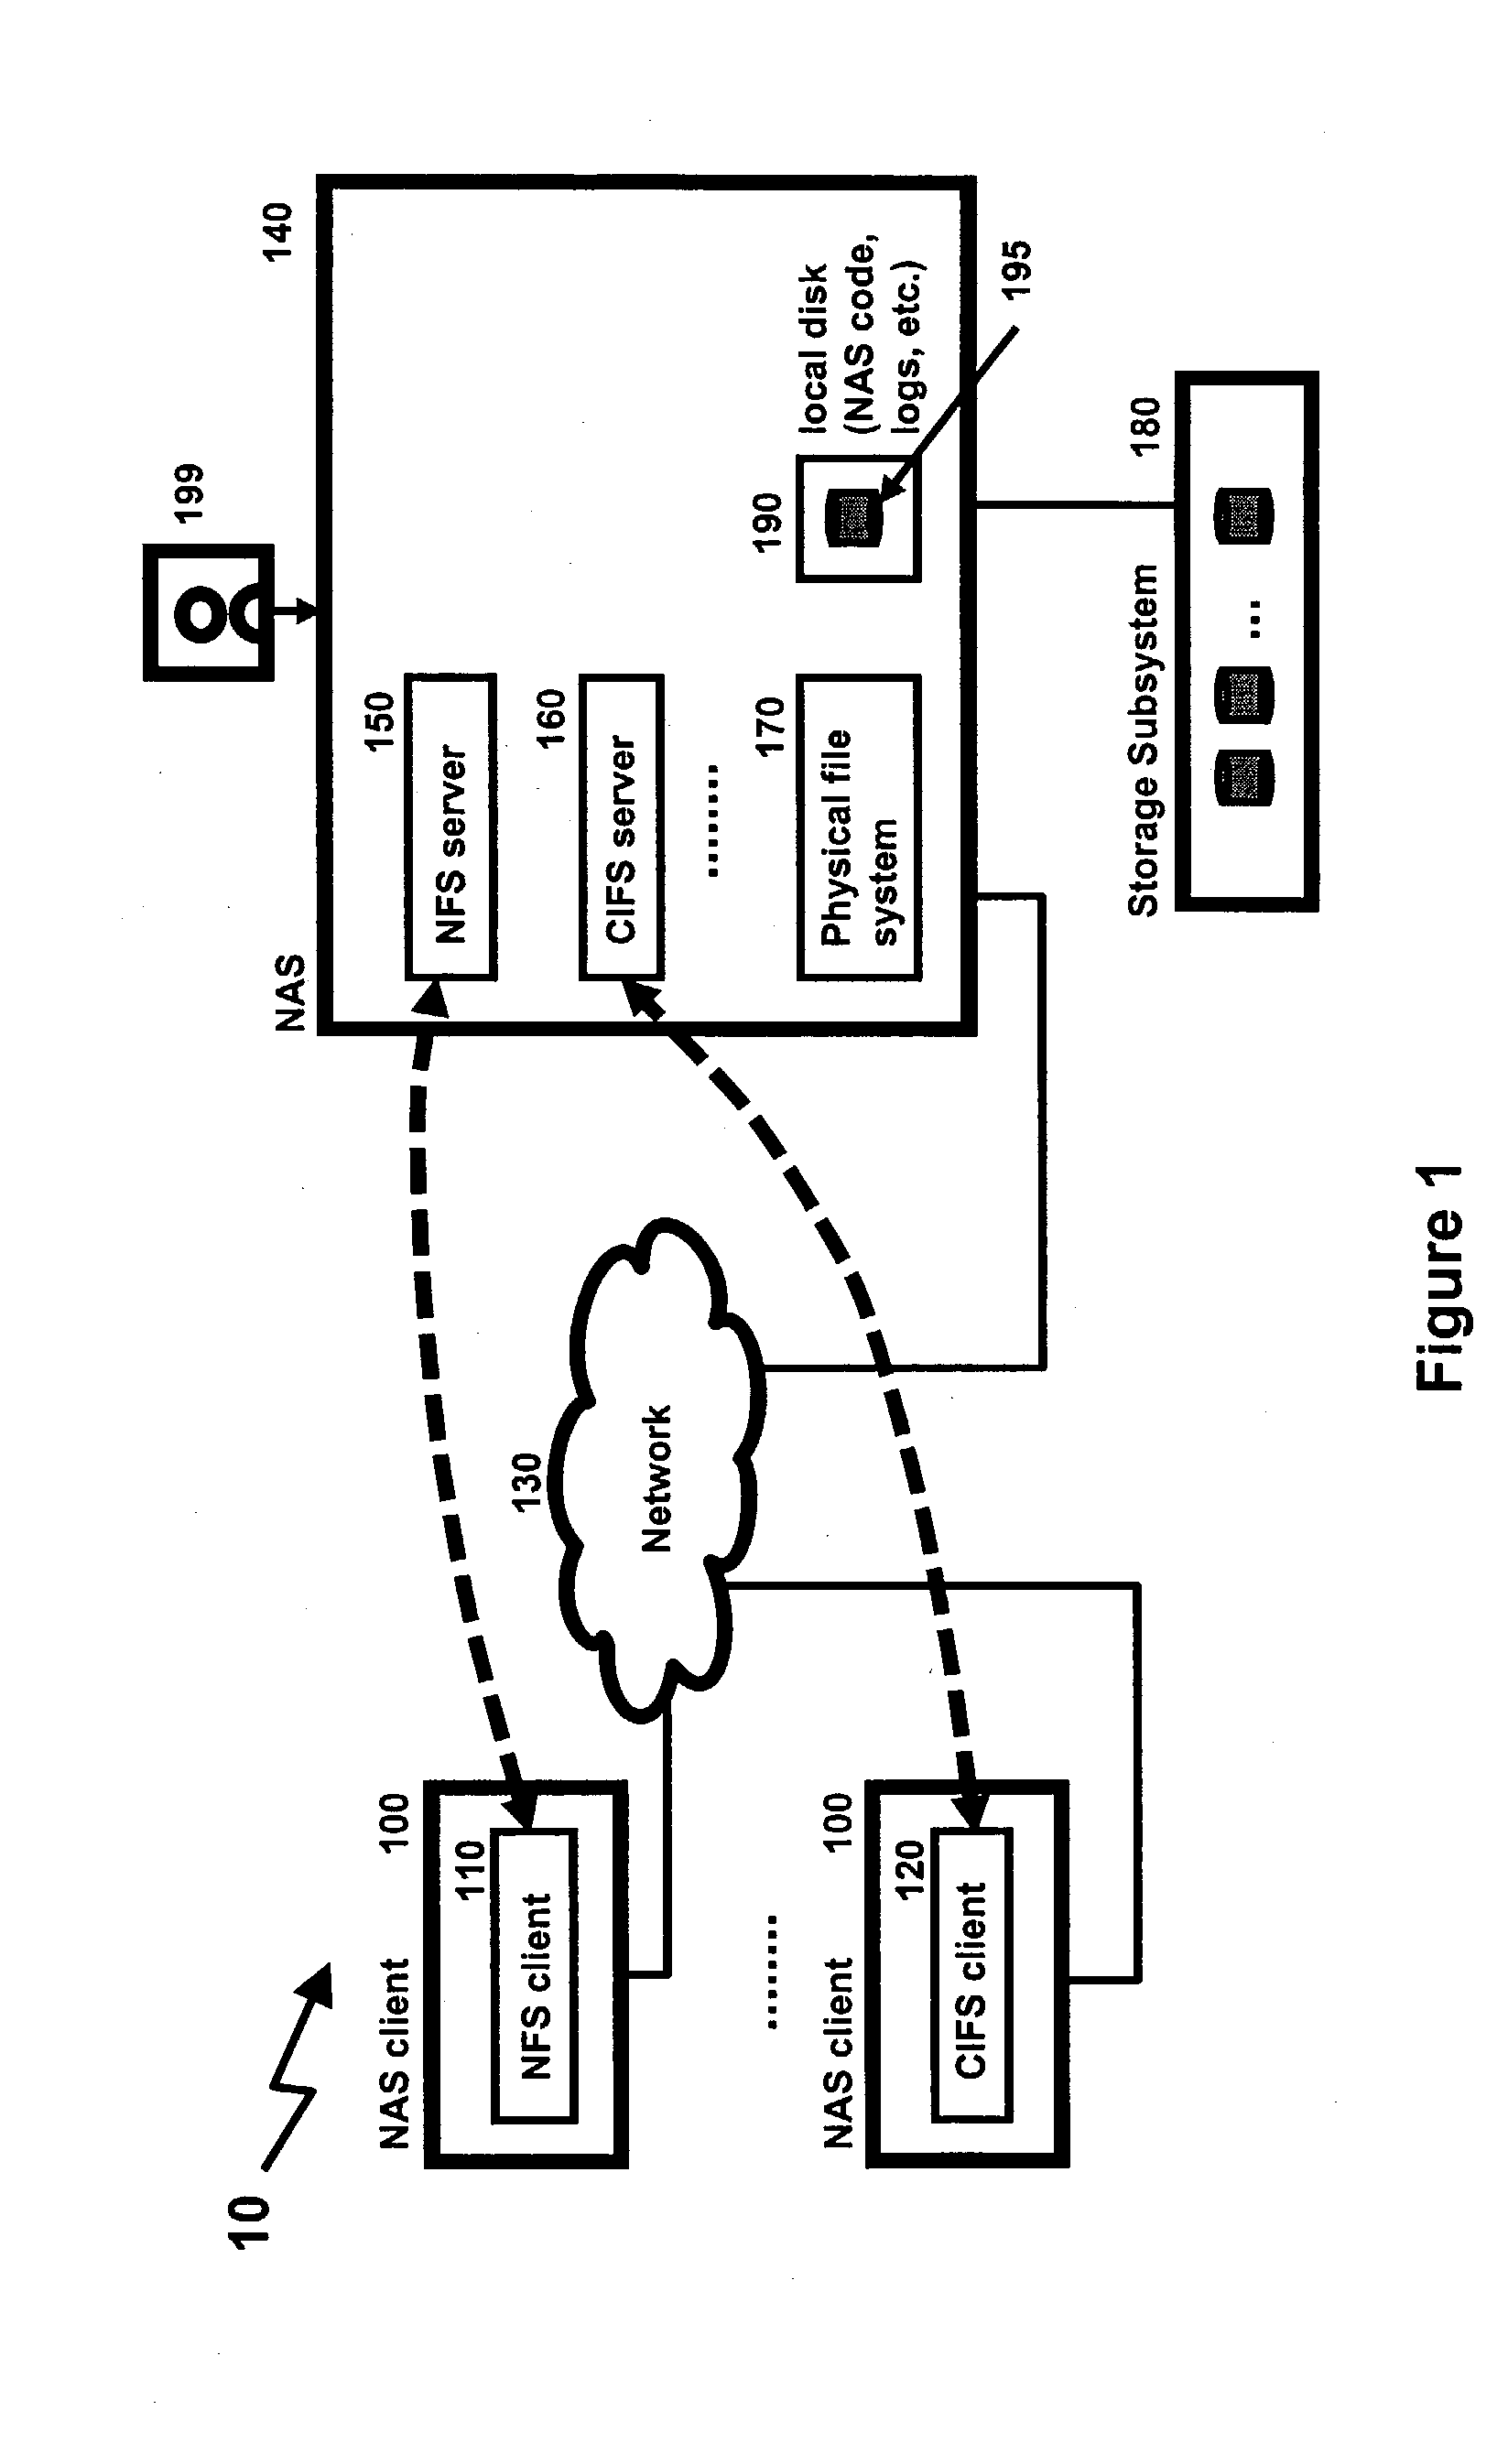 Running anti-virus software on a network attached storage device